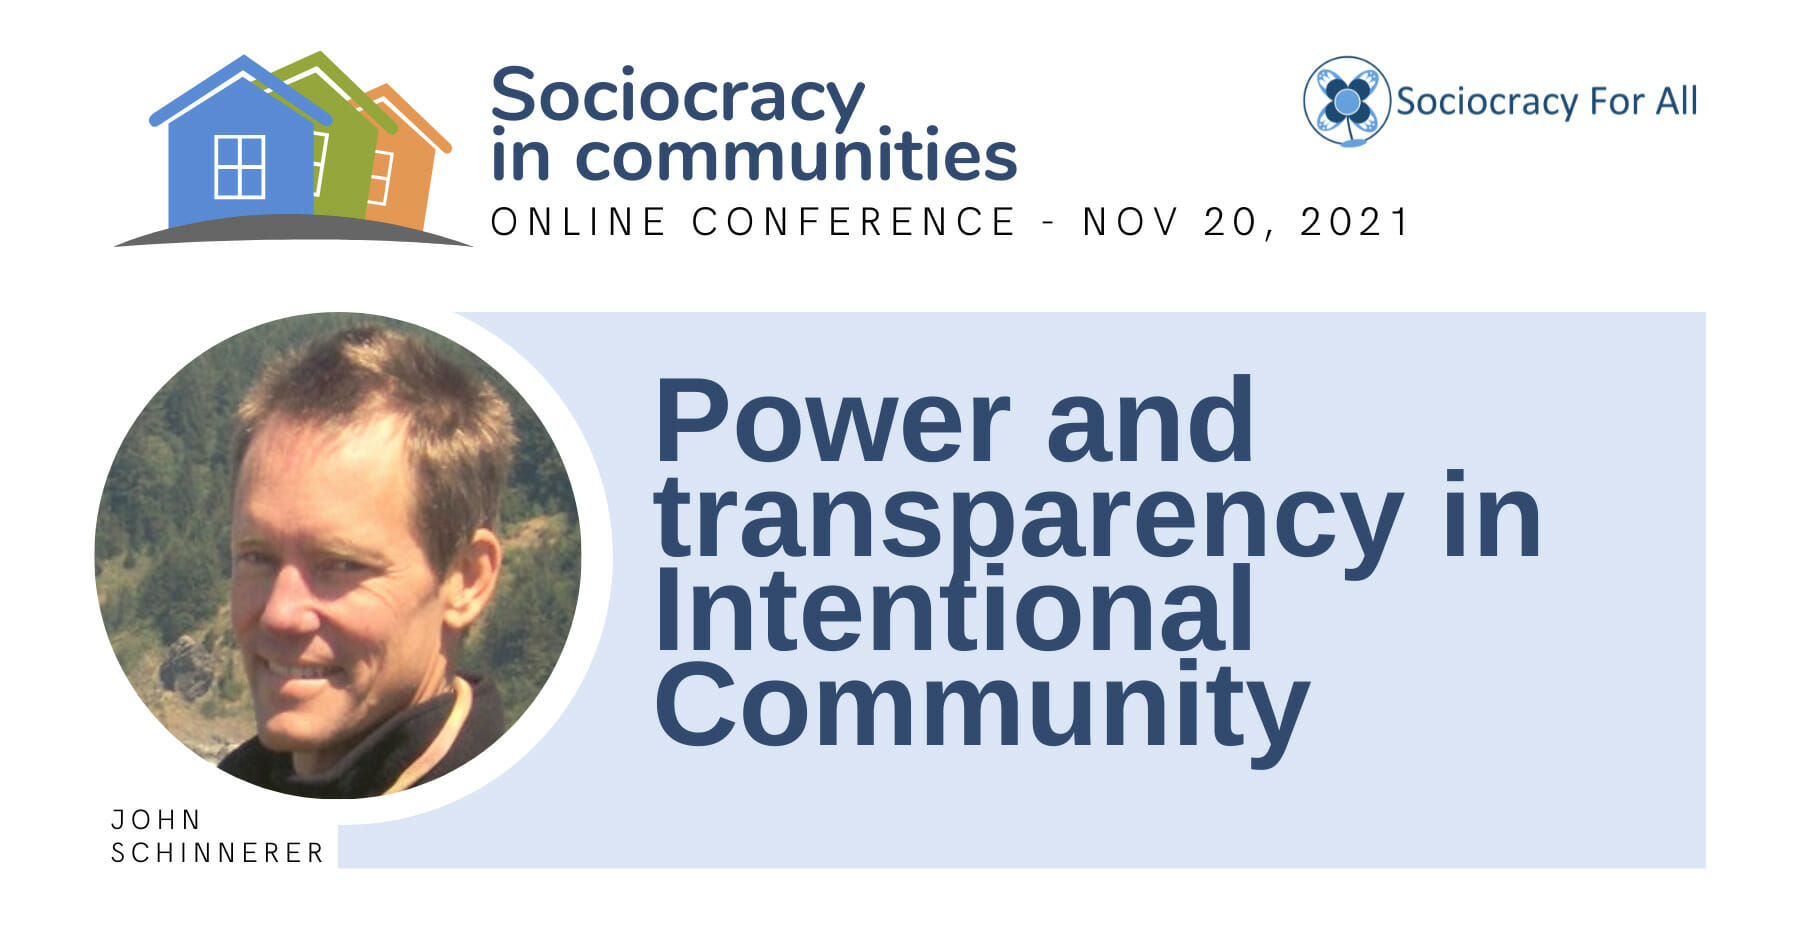 Power and Transparency in Intentional Community (John Schinnerer)